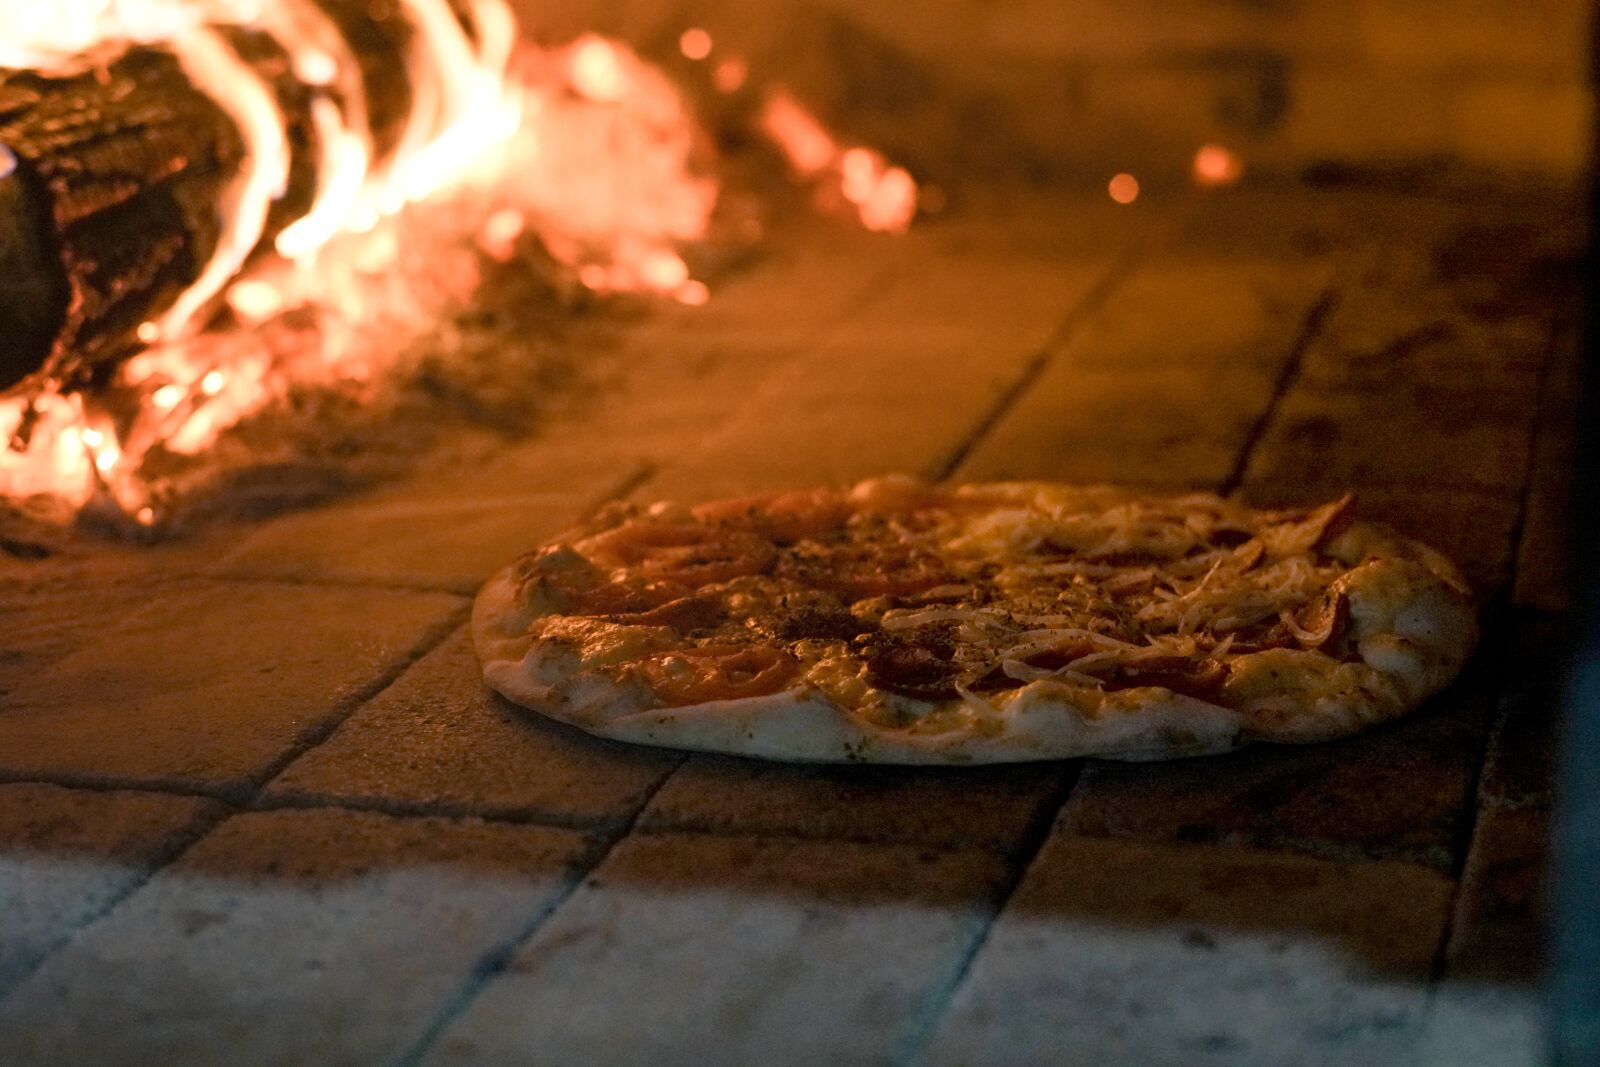 Sony a6500 sample photo. Pizza, pizza oven, restaurant photography